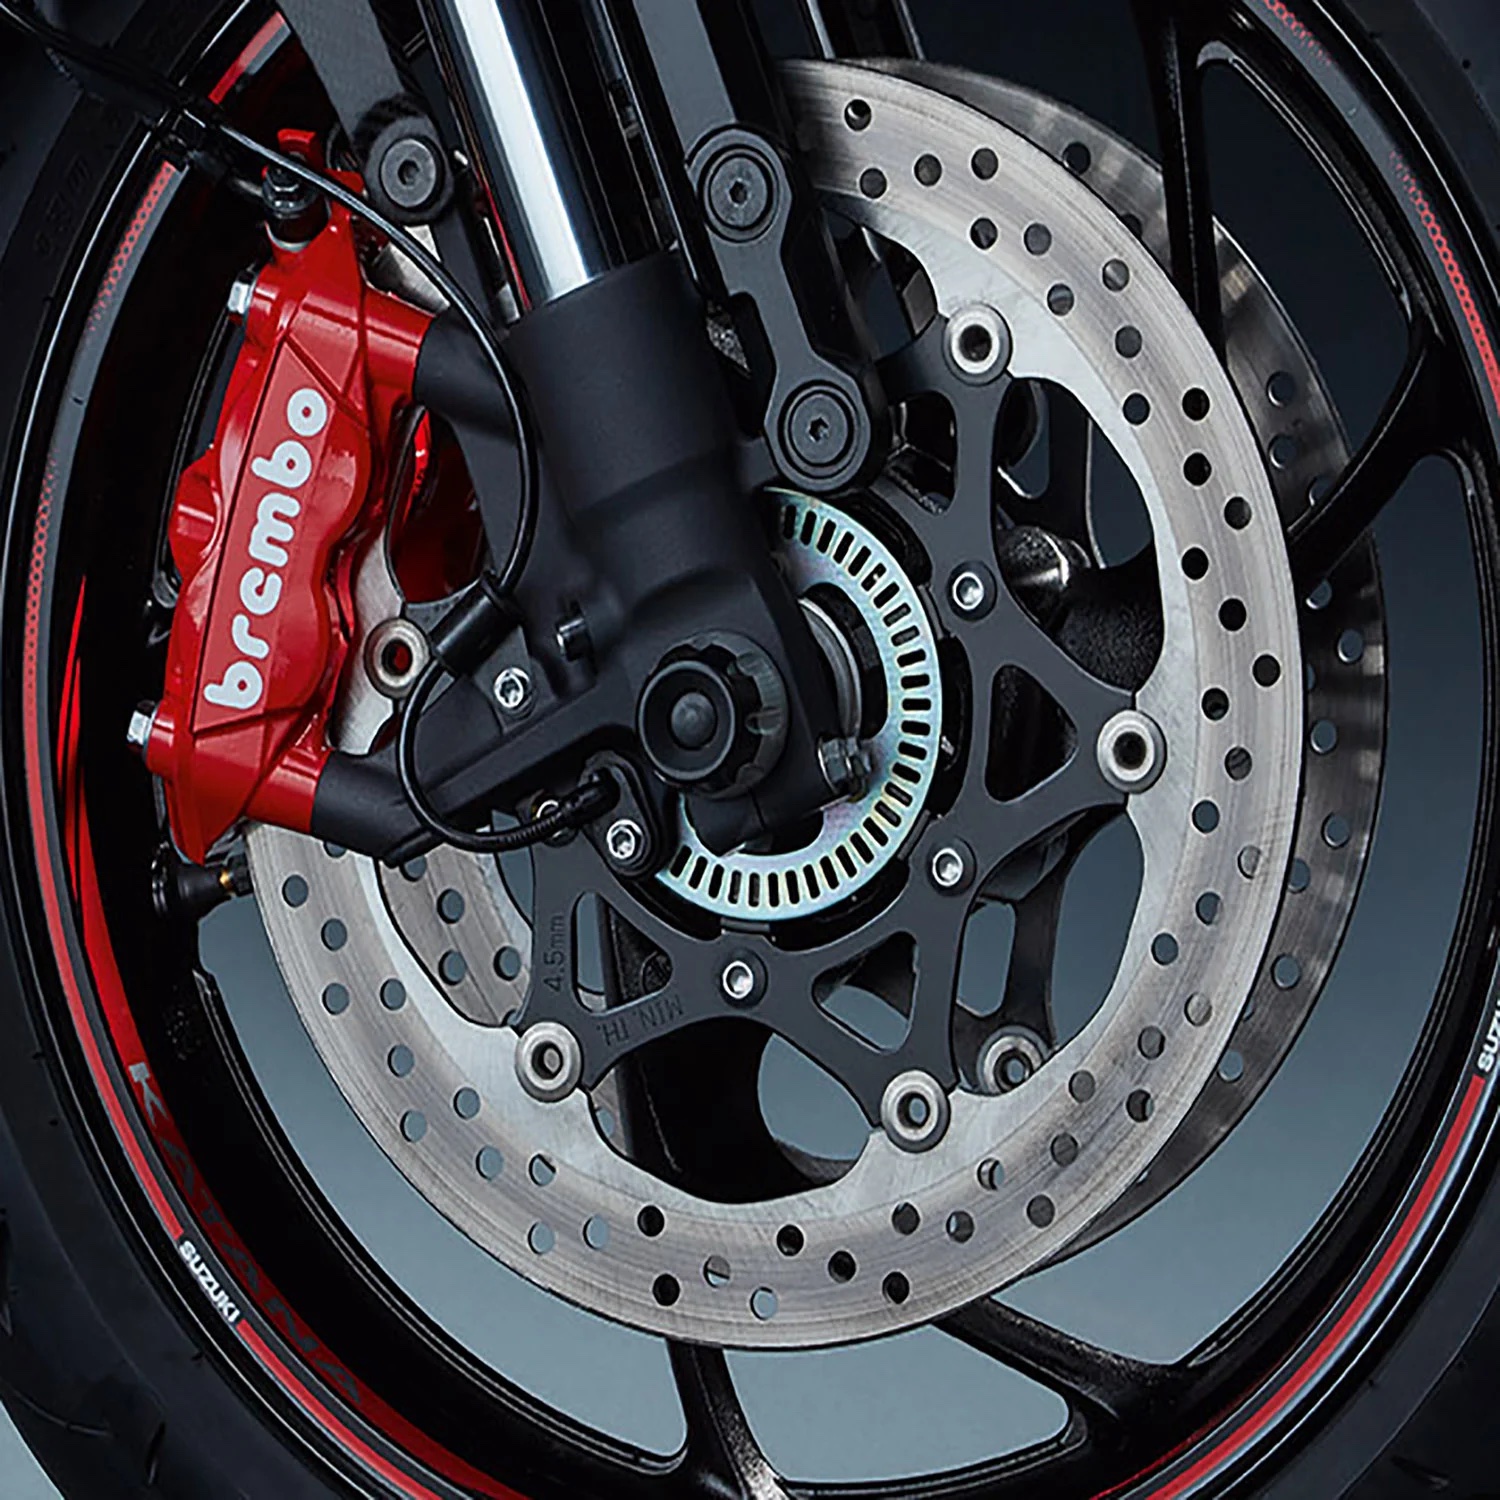 A view of Brembo brakes on various motorcycle models